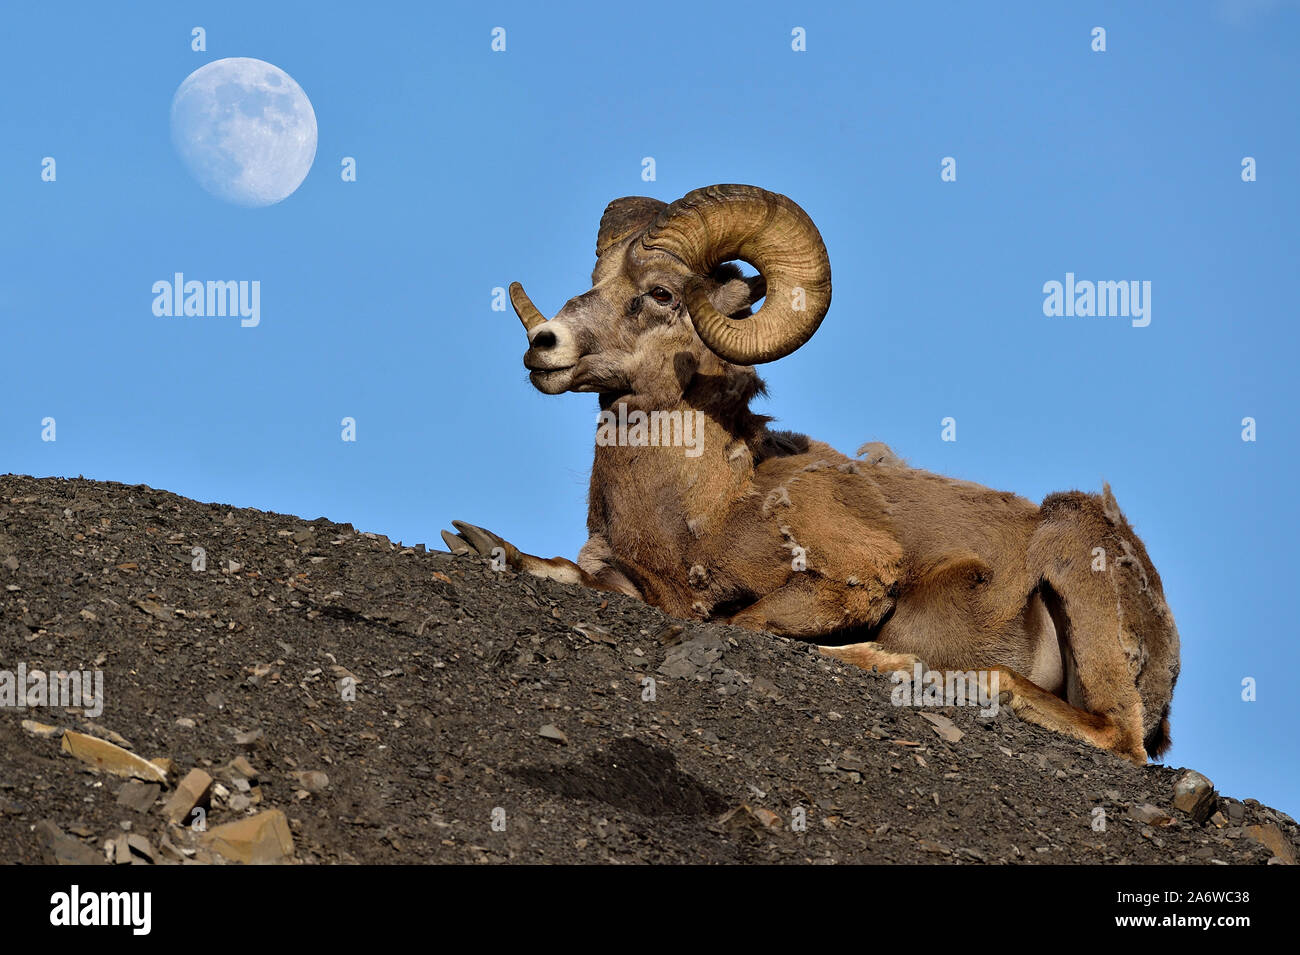 A male bighorn sheep 'Orvis canadensis', laying down on a hillside with the moon in a blue sky as his background in Alberta Canada. Stock Photo